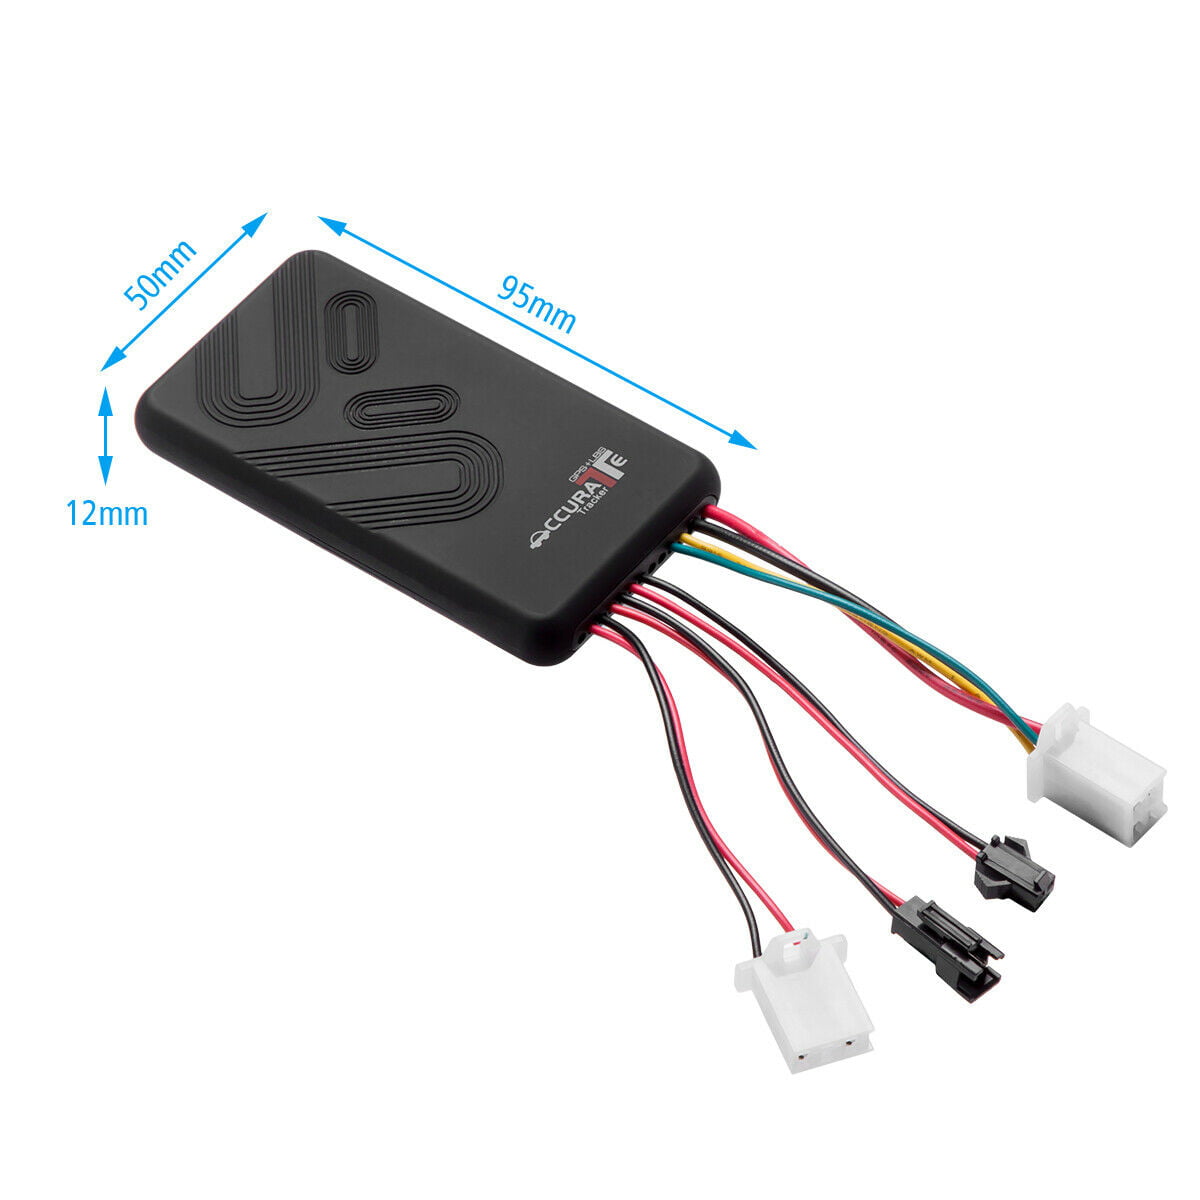 GT06 GPS GSM GPRS Car Tracker Locator Anti-theft SMS Dial Tracking Device+Cable 